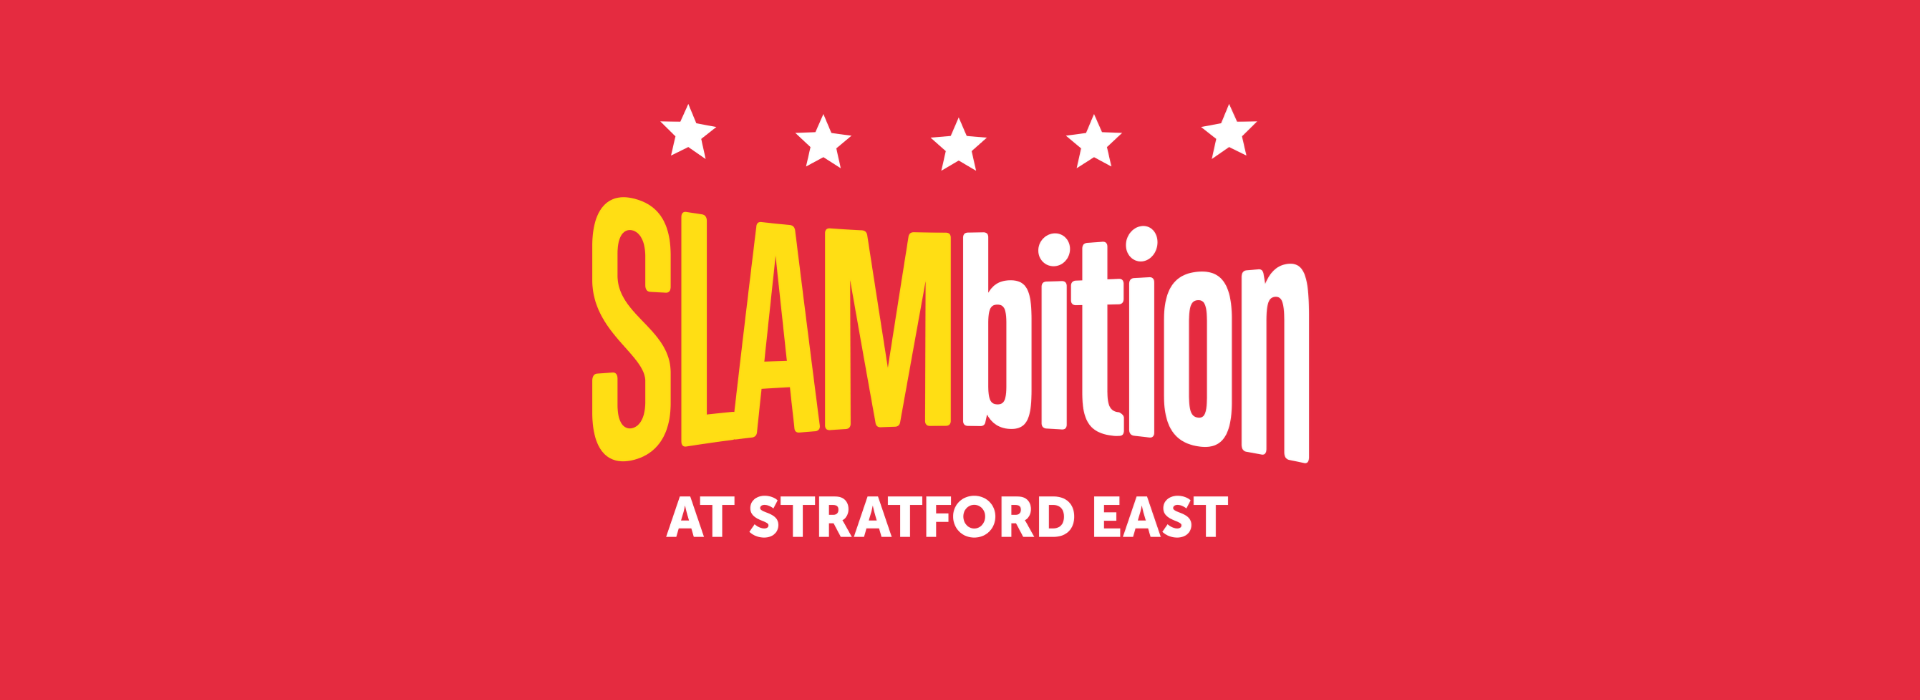 Artwork for SLAMbition. The word 'SLAMbition' on top of red background. There are 5 stars above the title.